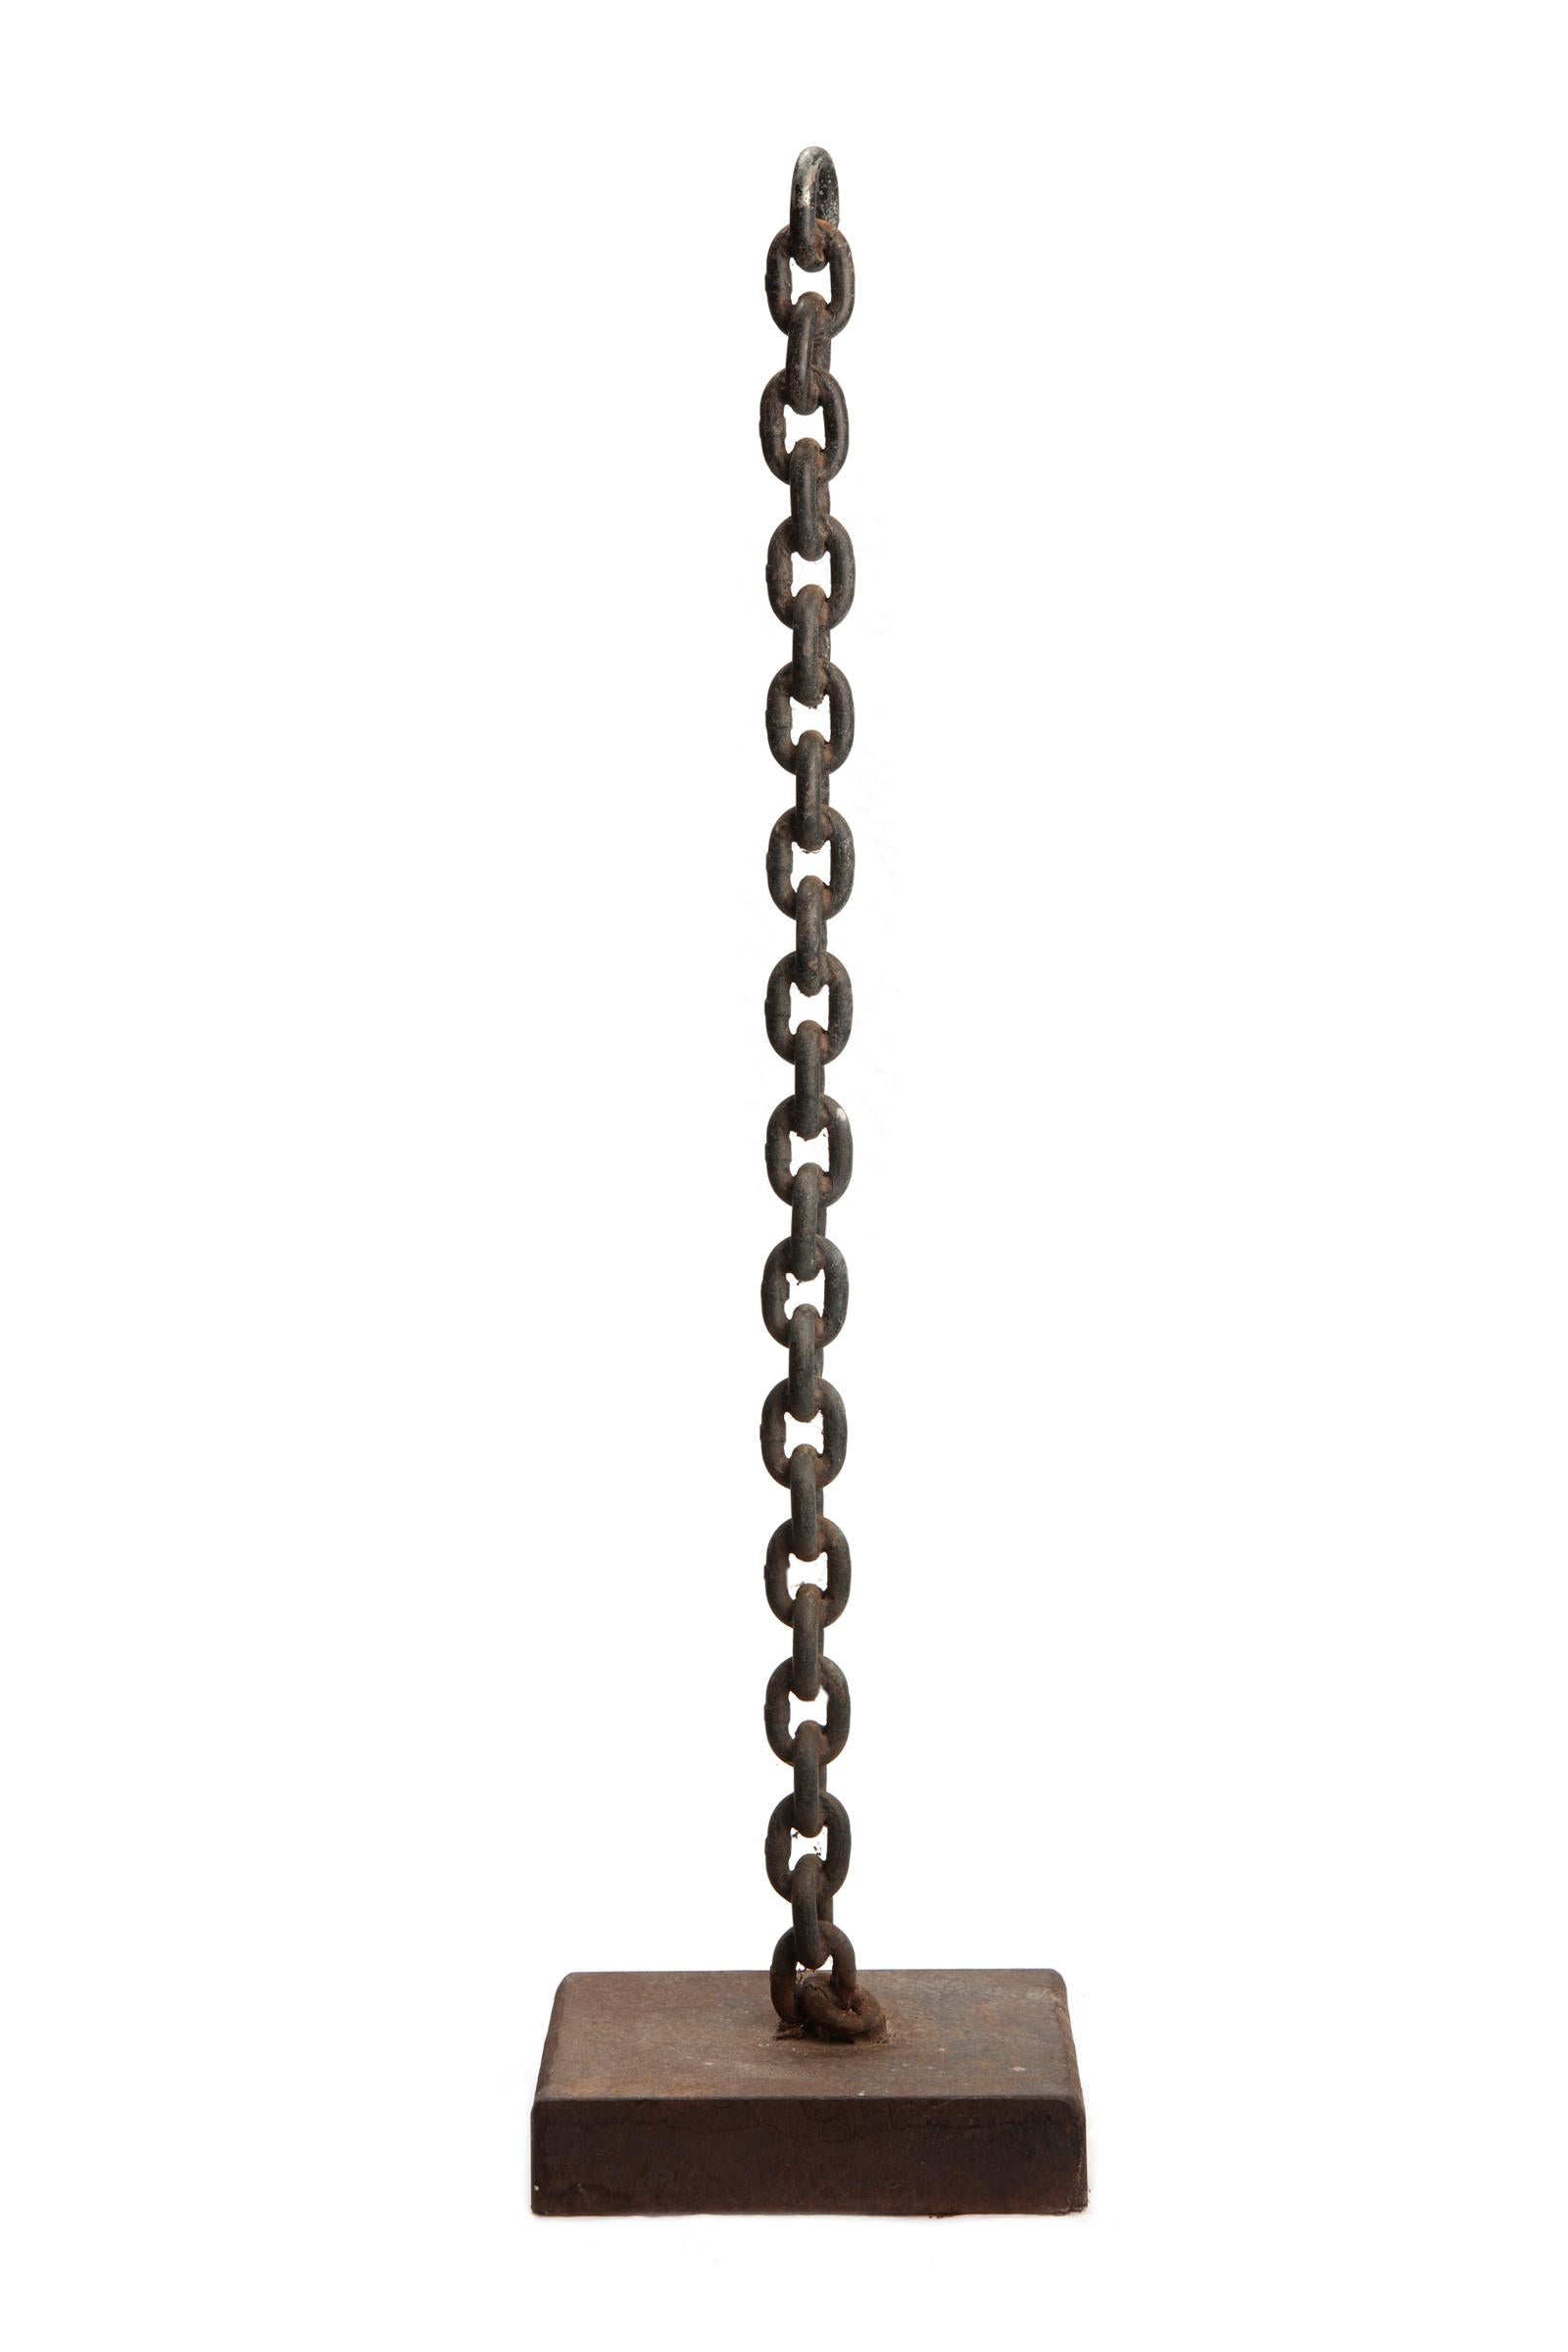 Mid-20th Century Brutalist Chain Link Sculpture For Sale